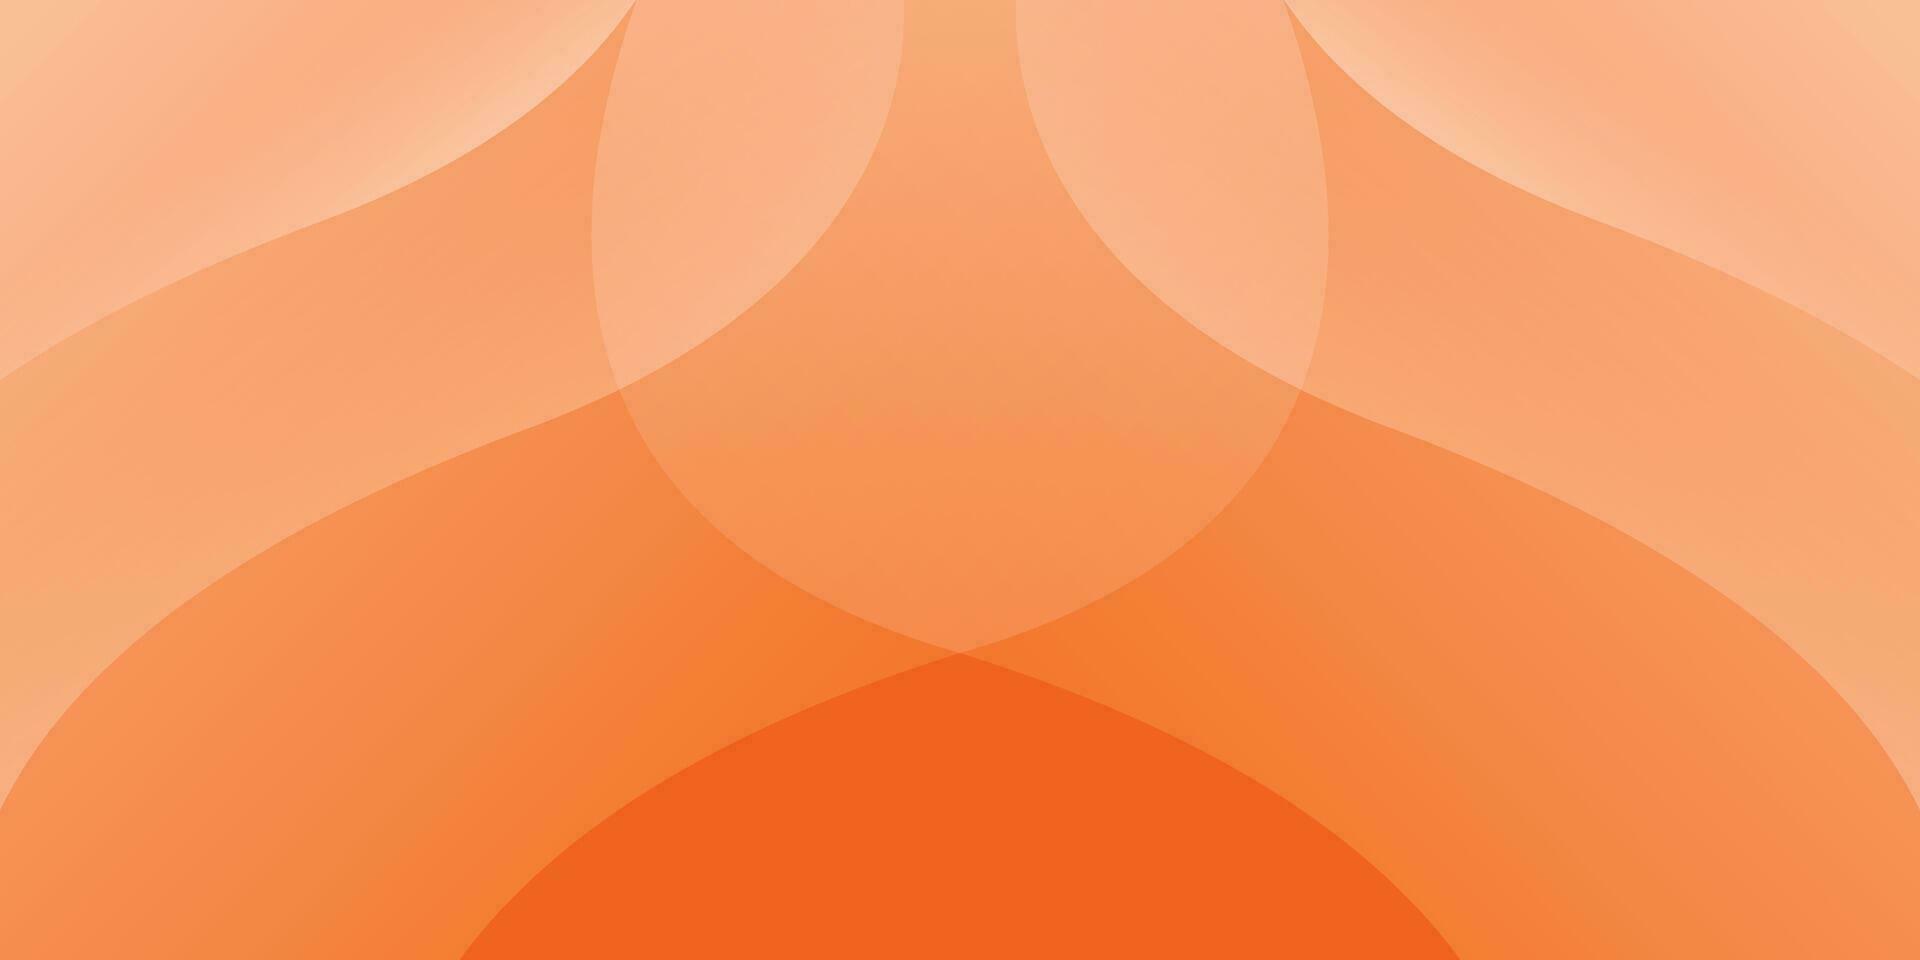 Minimal geometric abstract background. Orange elements with fluid gradient. Dynamic shapes composition. Eps10 vector